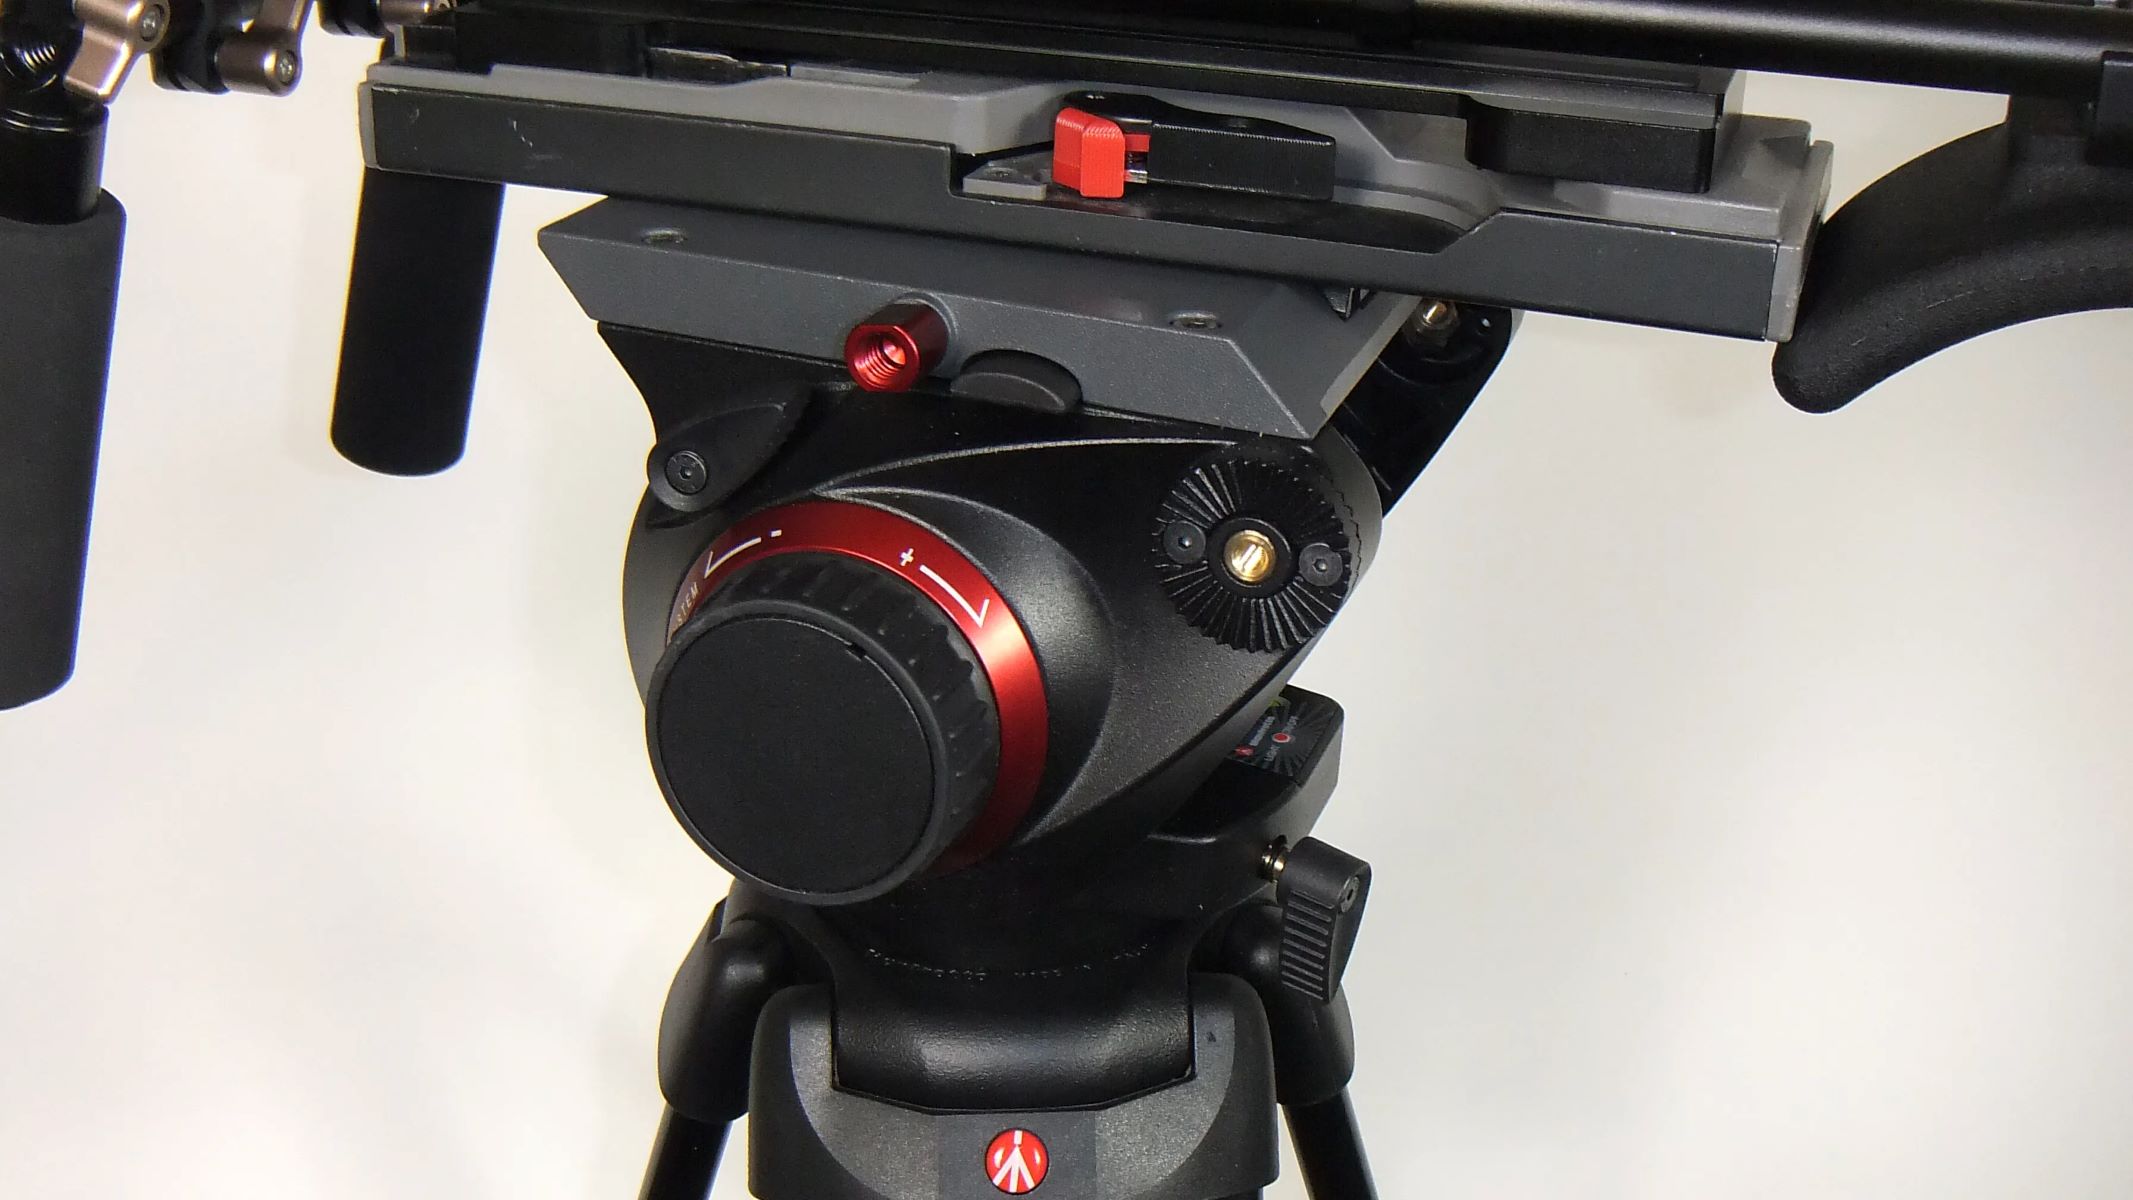 Tripod Head Maintenance: Removing The Head From A Manfrotto Tripod